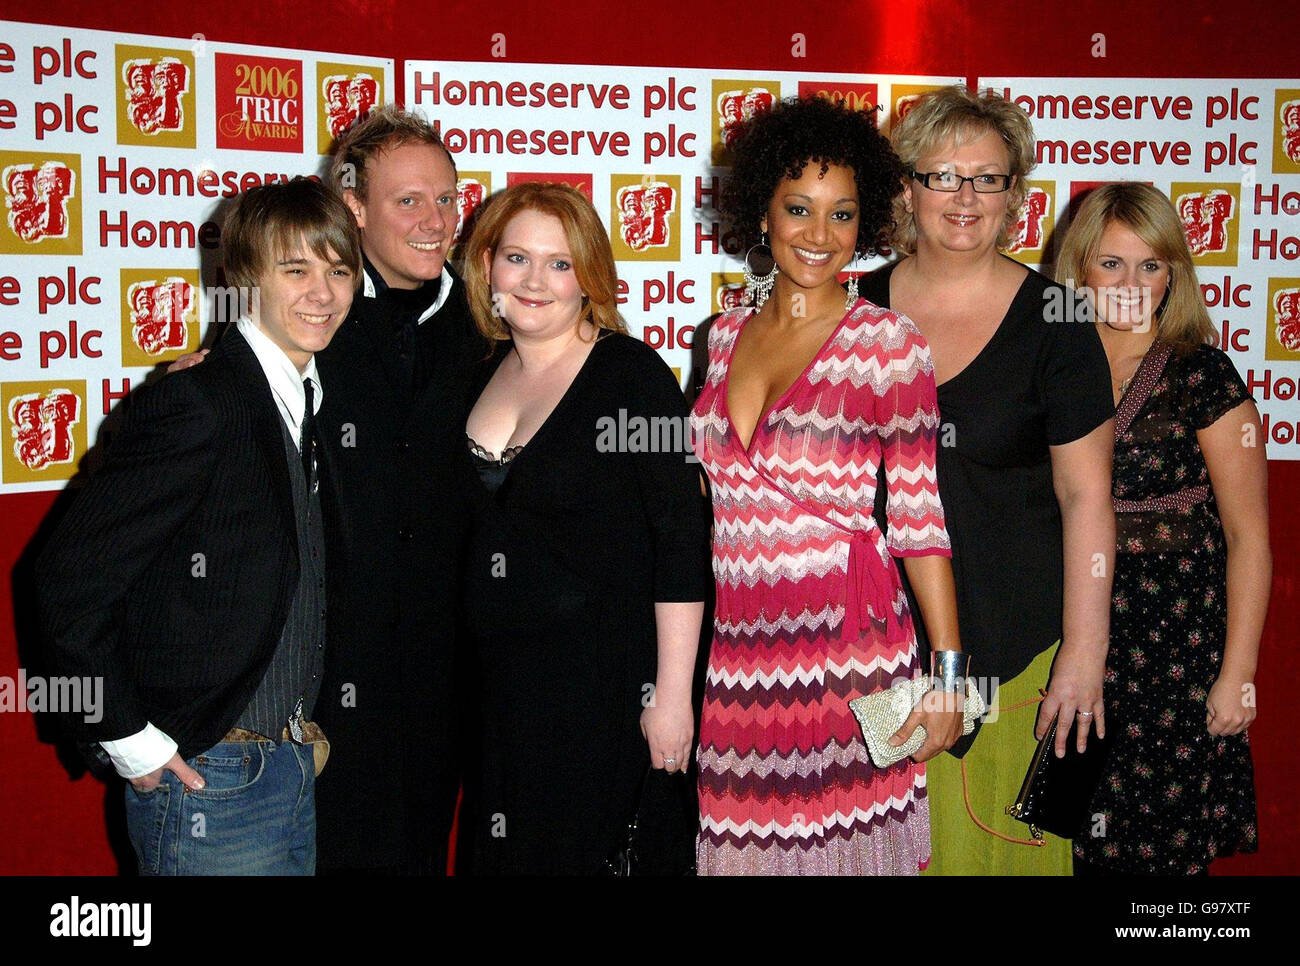 Members of the cast of Coronation Street (Left to Right) Jack Shepherd, Antony Cotton, Jennie McAlpine, Tupele Dorgu, Sue Cleaver and Sally Lindsay arrive for the Television and Radio Industries Club (TRIC) Awards, at Grosvenor House, central London, Tuesday 7 March 2006. The awards honour performers and programmes and are voted for by radio and television personnel. PRESS ASSOCIATION Photo. Photo credit should read: Steve Parsons/PA Stock Photo